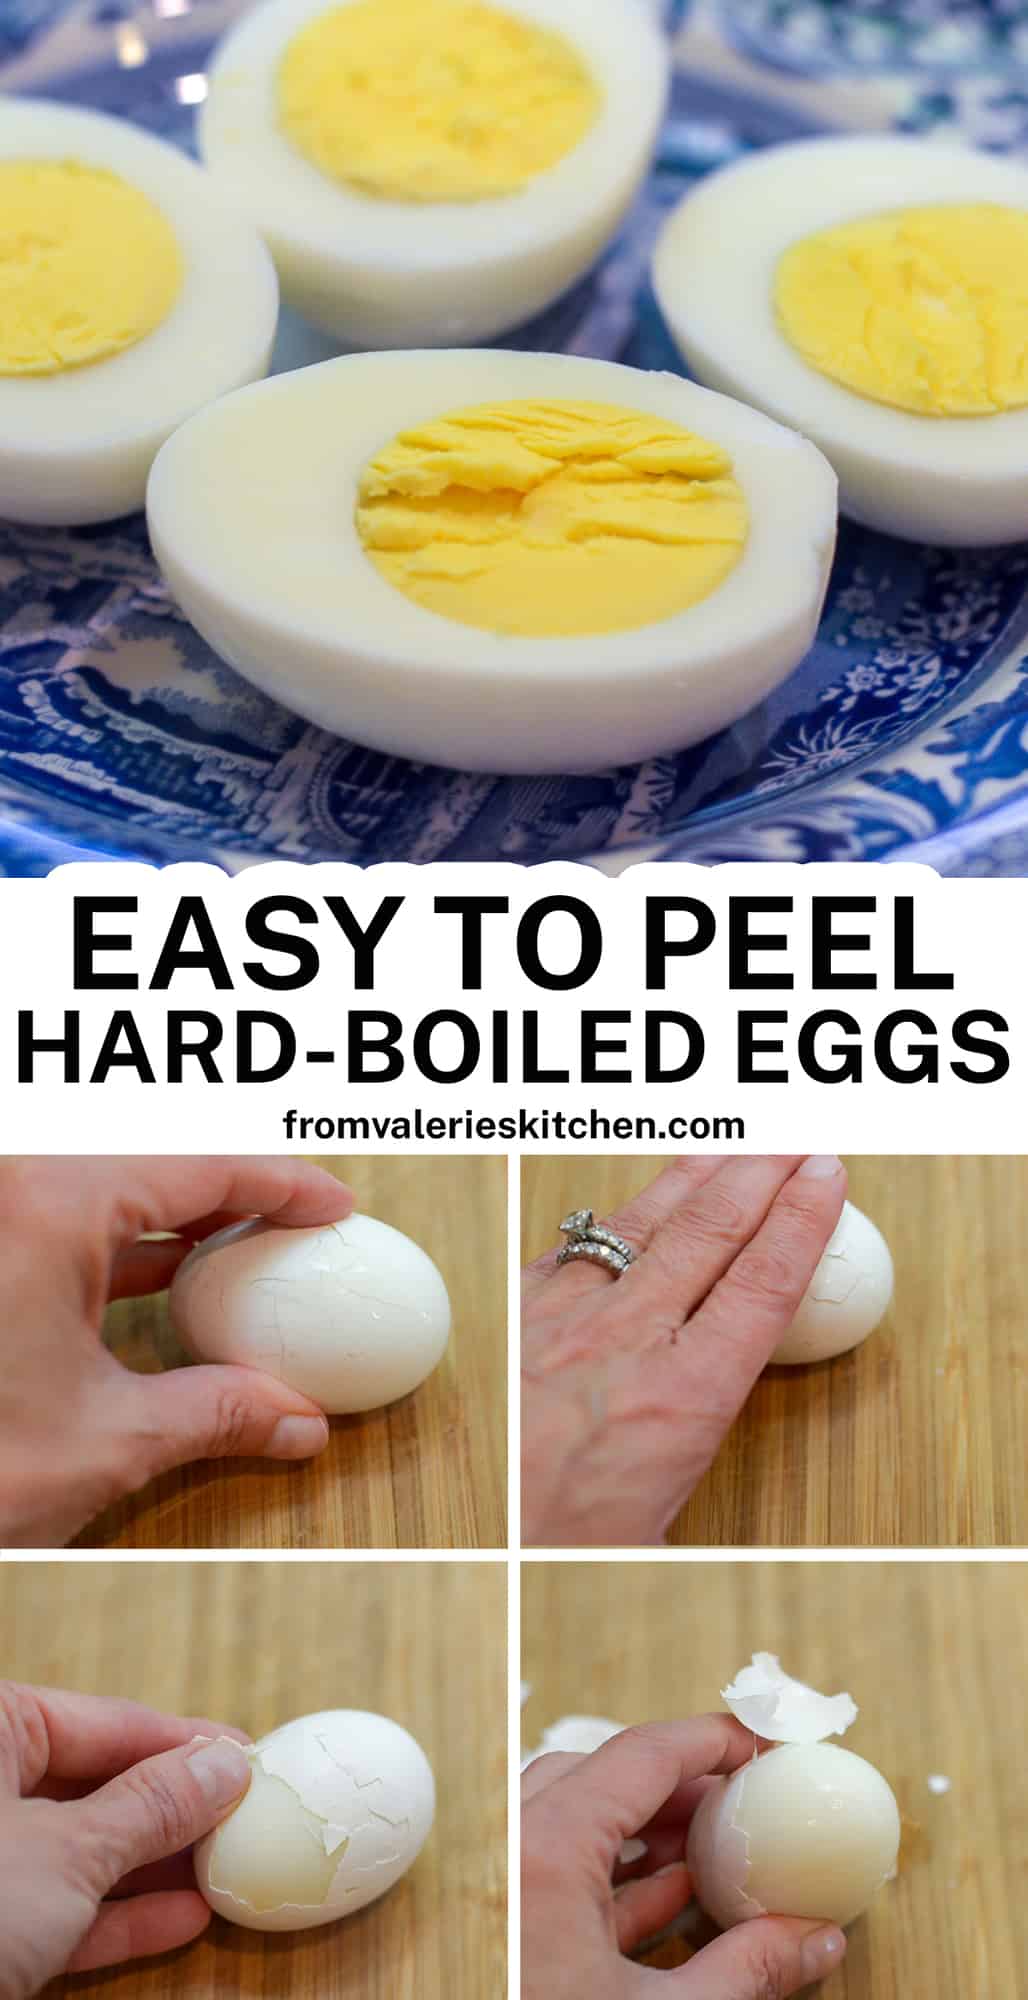 Five images of hard boiled eggs with overlay text.